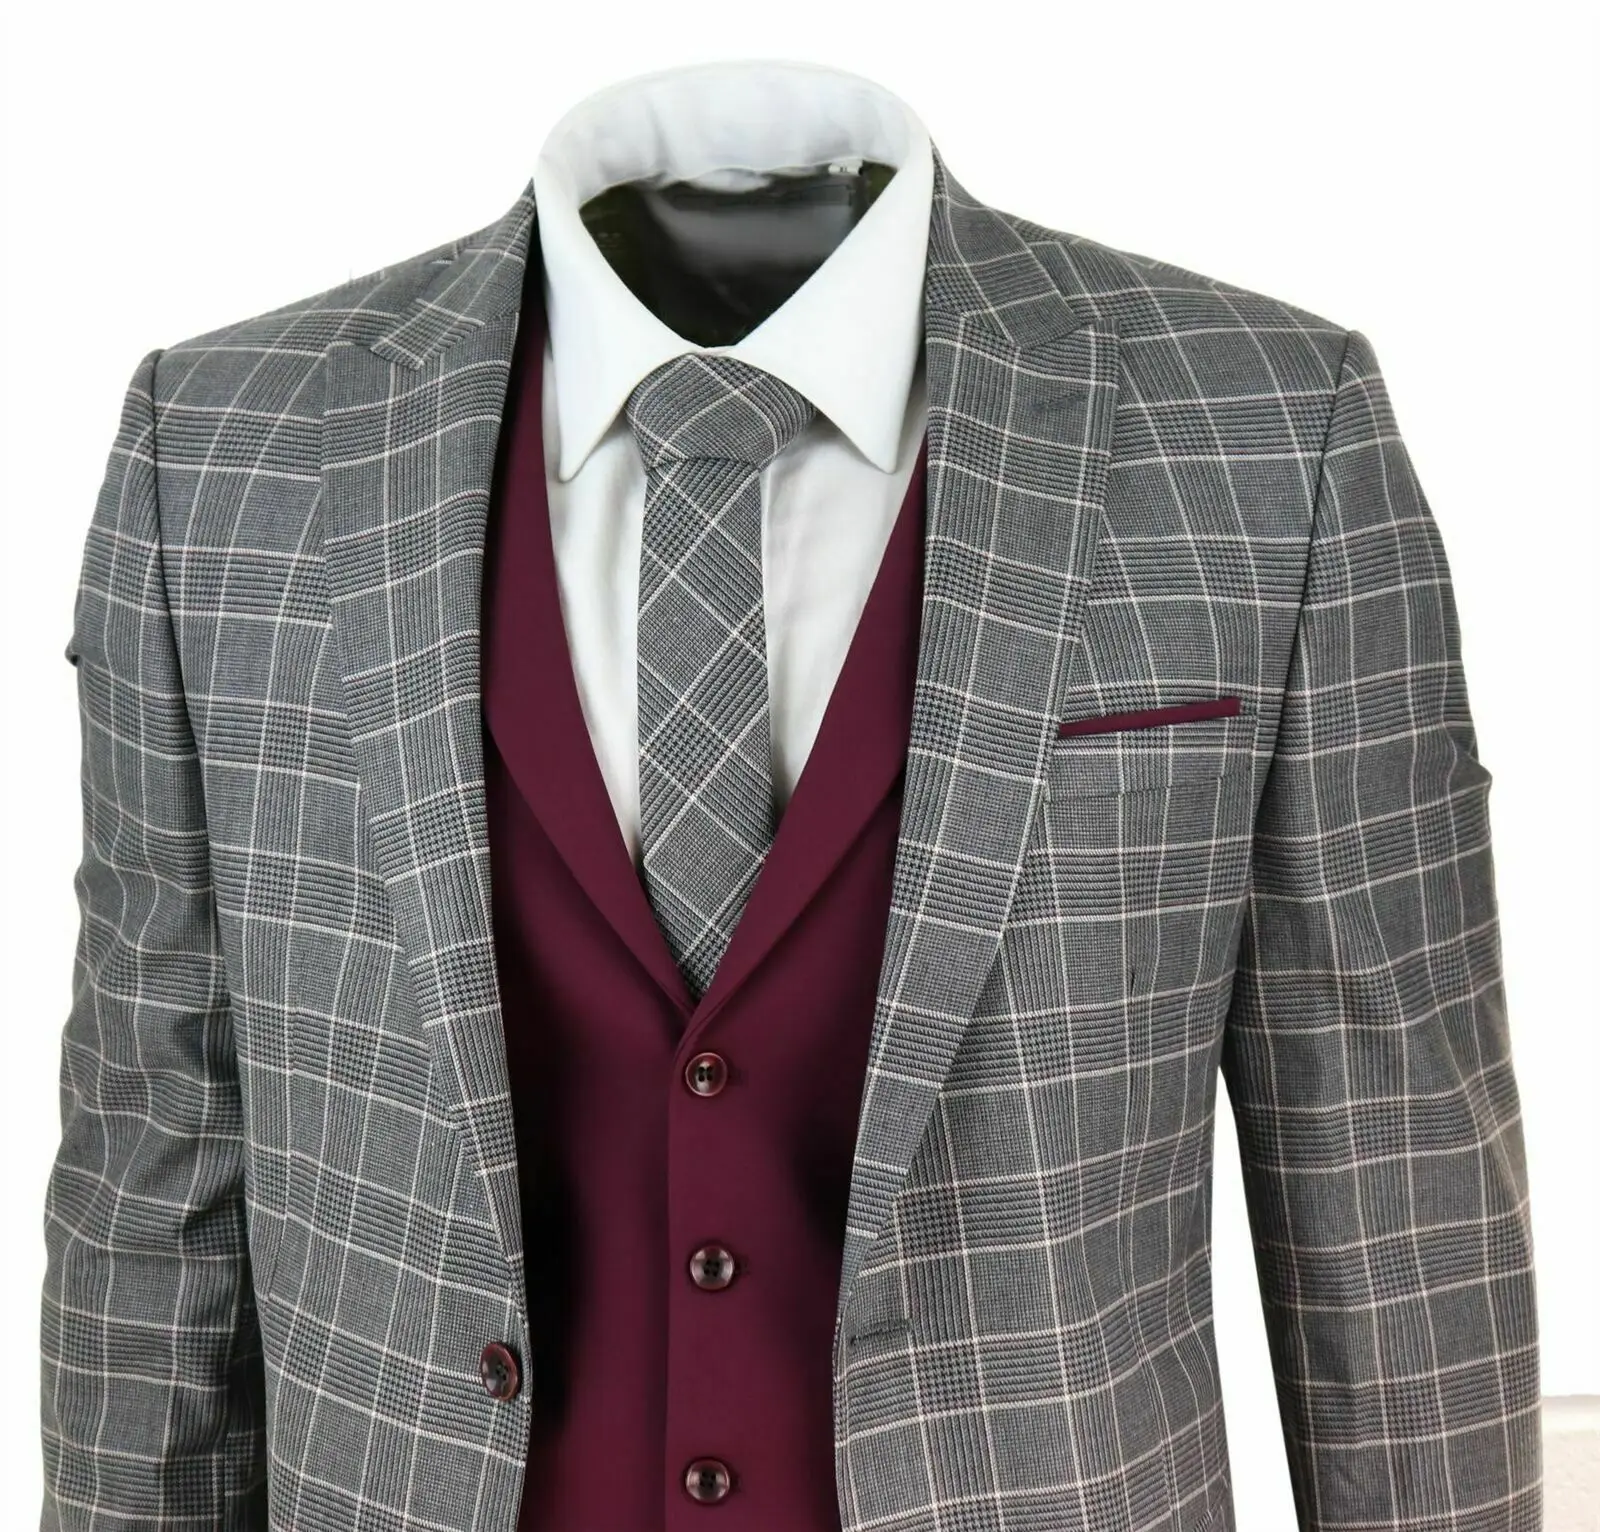 Mens 3 Piece Suit Check 1920s Gatsby Tweed Vintage Grey Classic Wedding Prom 